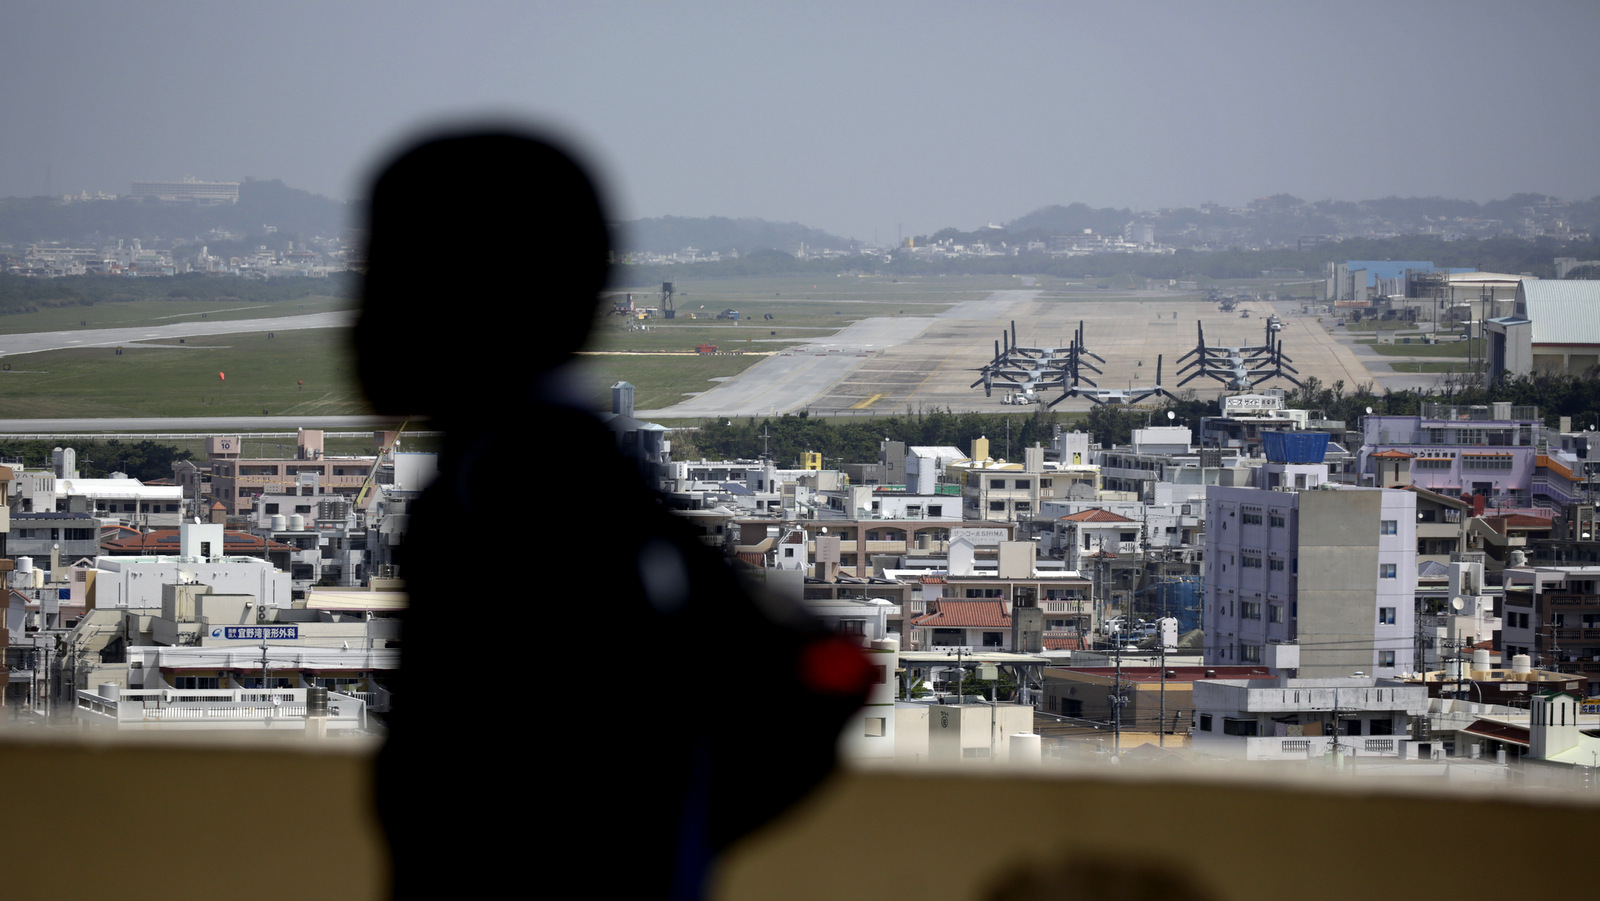 A child looks at the U.S. Marine Corps Futenma Air Station and the surrounding area from an observation deck at a park in Ginowan, Okinawa Prefecture on southern Japan, March 23, 2015 (AP/Eugene Hoshiko)